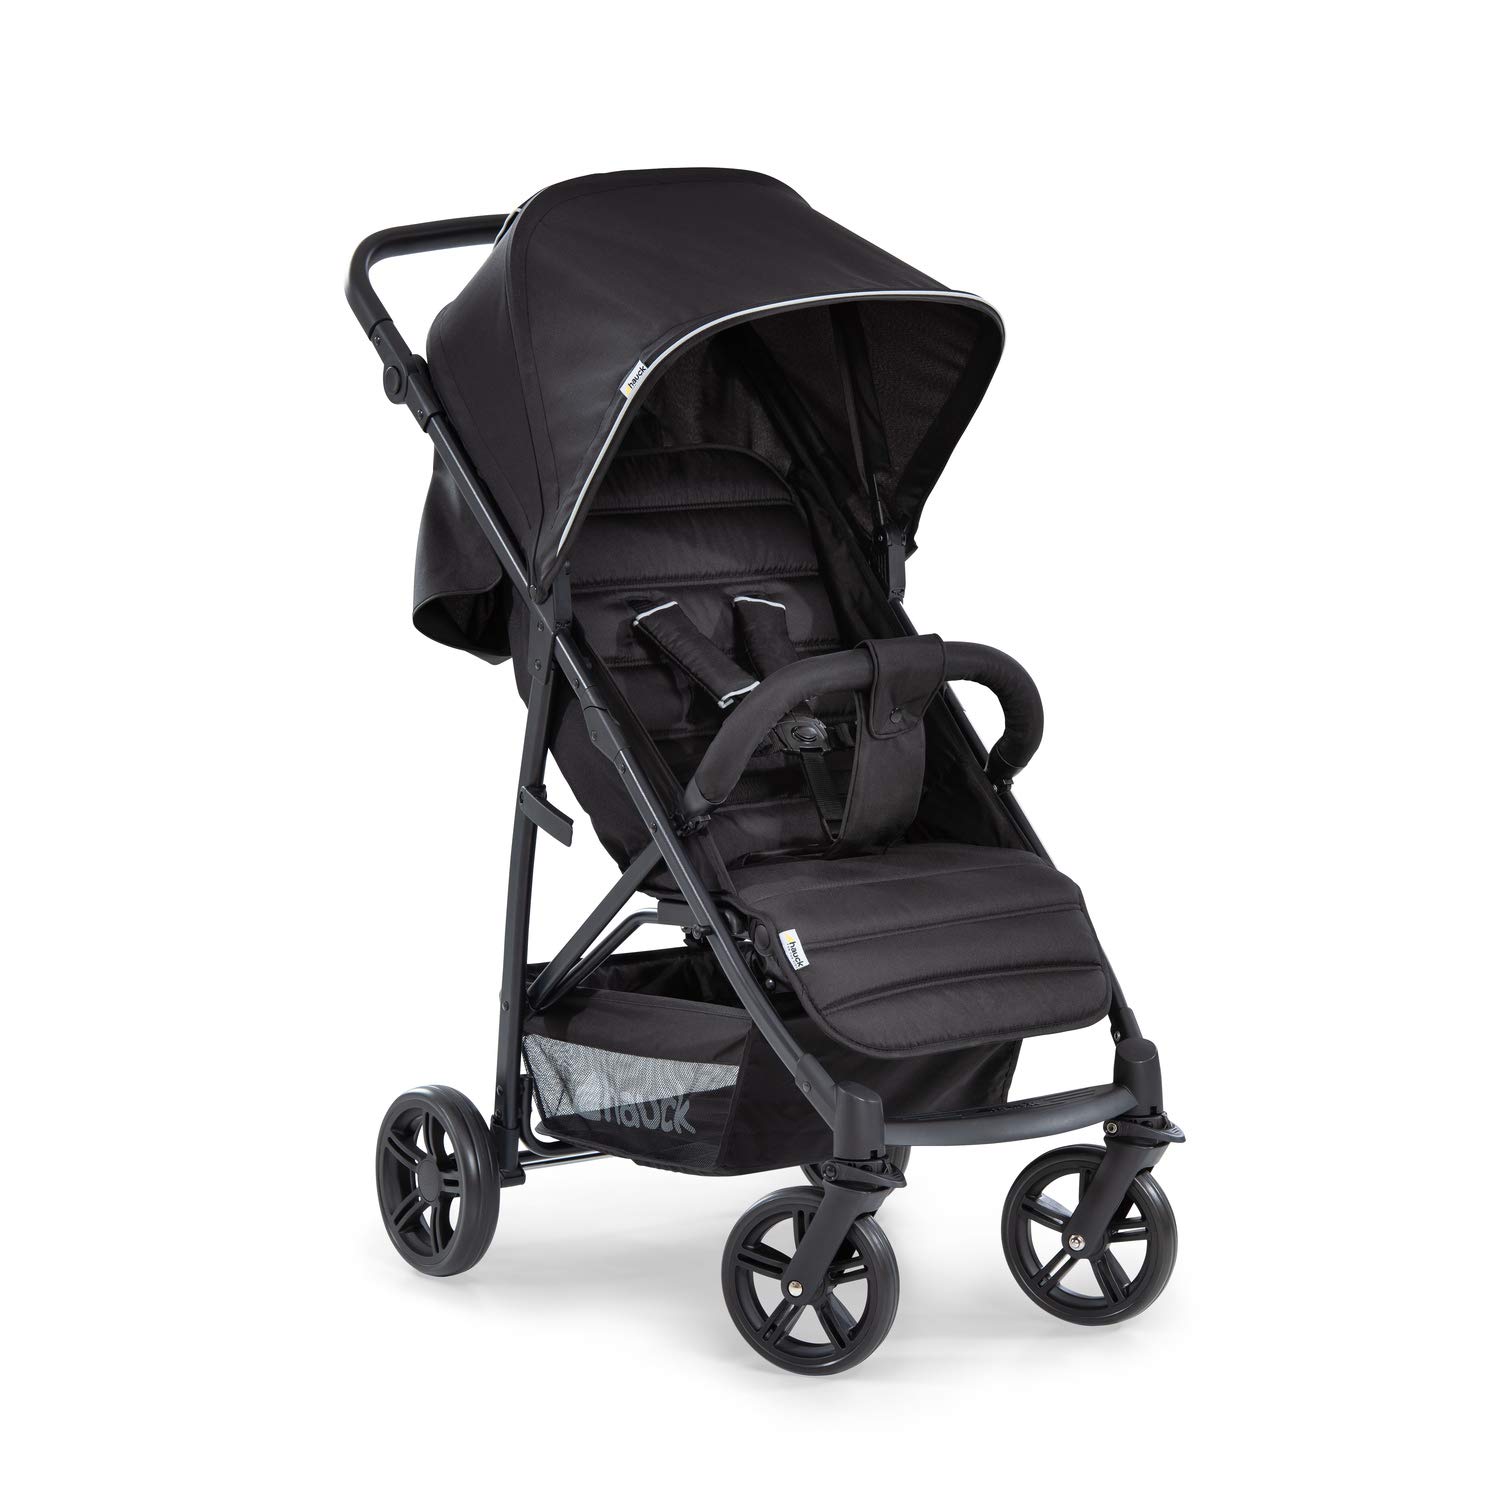 Hauck Buggy Rapid 4, Maximum Load 25 kg, Quick Folding, Compact, Height Adjustable, Reclining Position from Birth, Large Shopping Basket, Denim Blue Grey